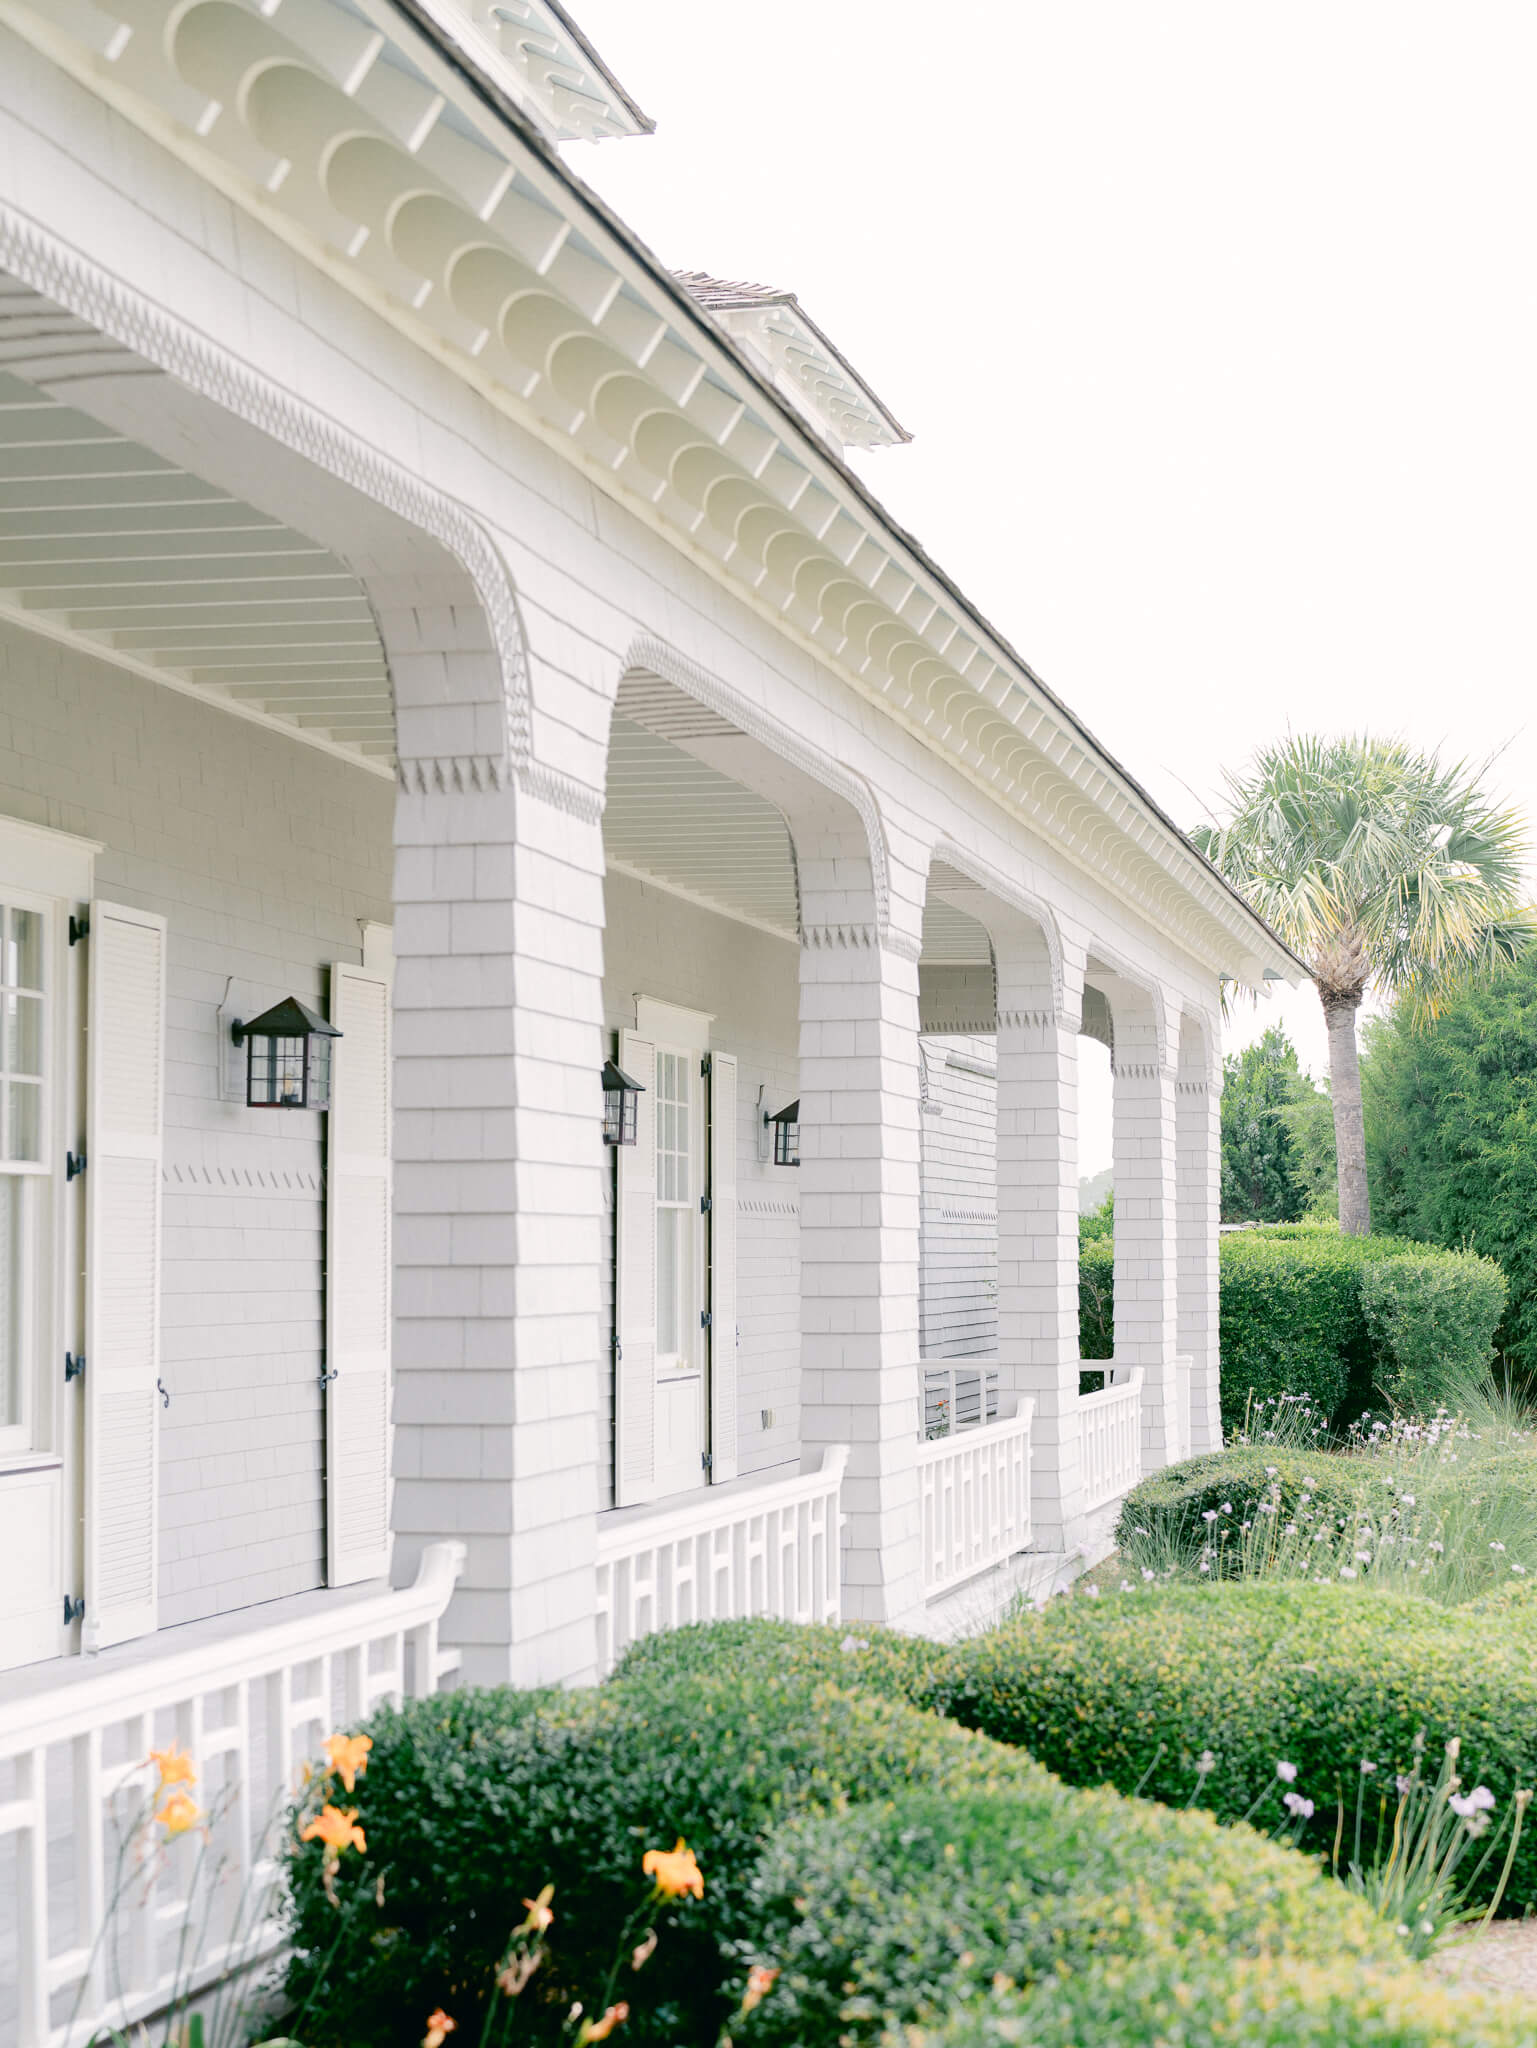 The side porch of Kiawah Island Resort with it's columns and low green shrubs.